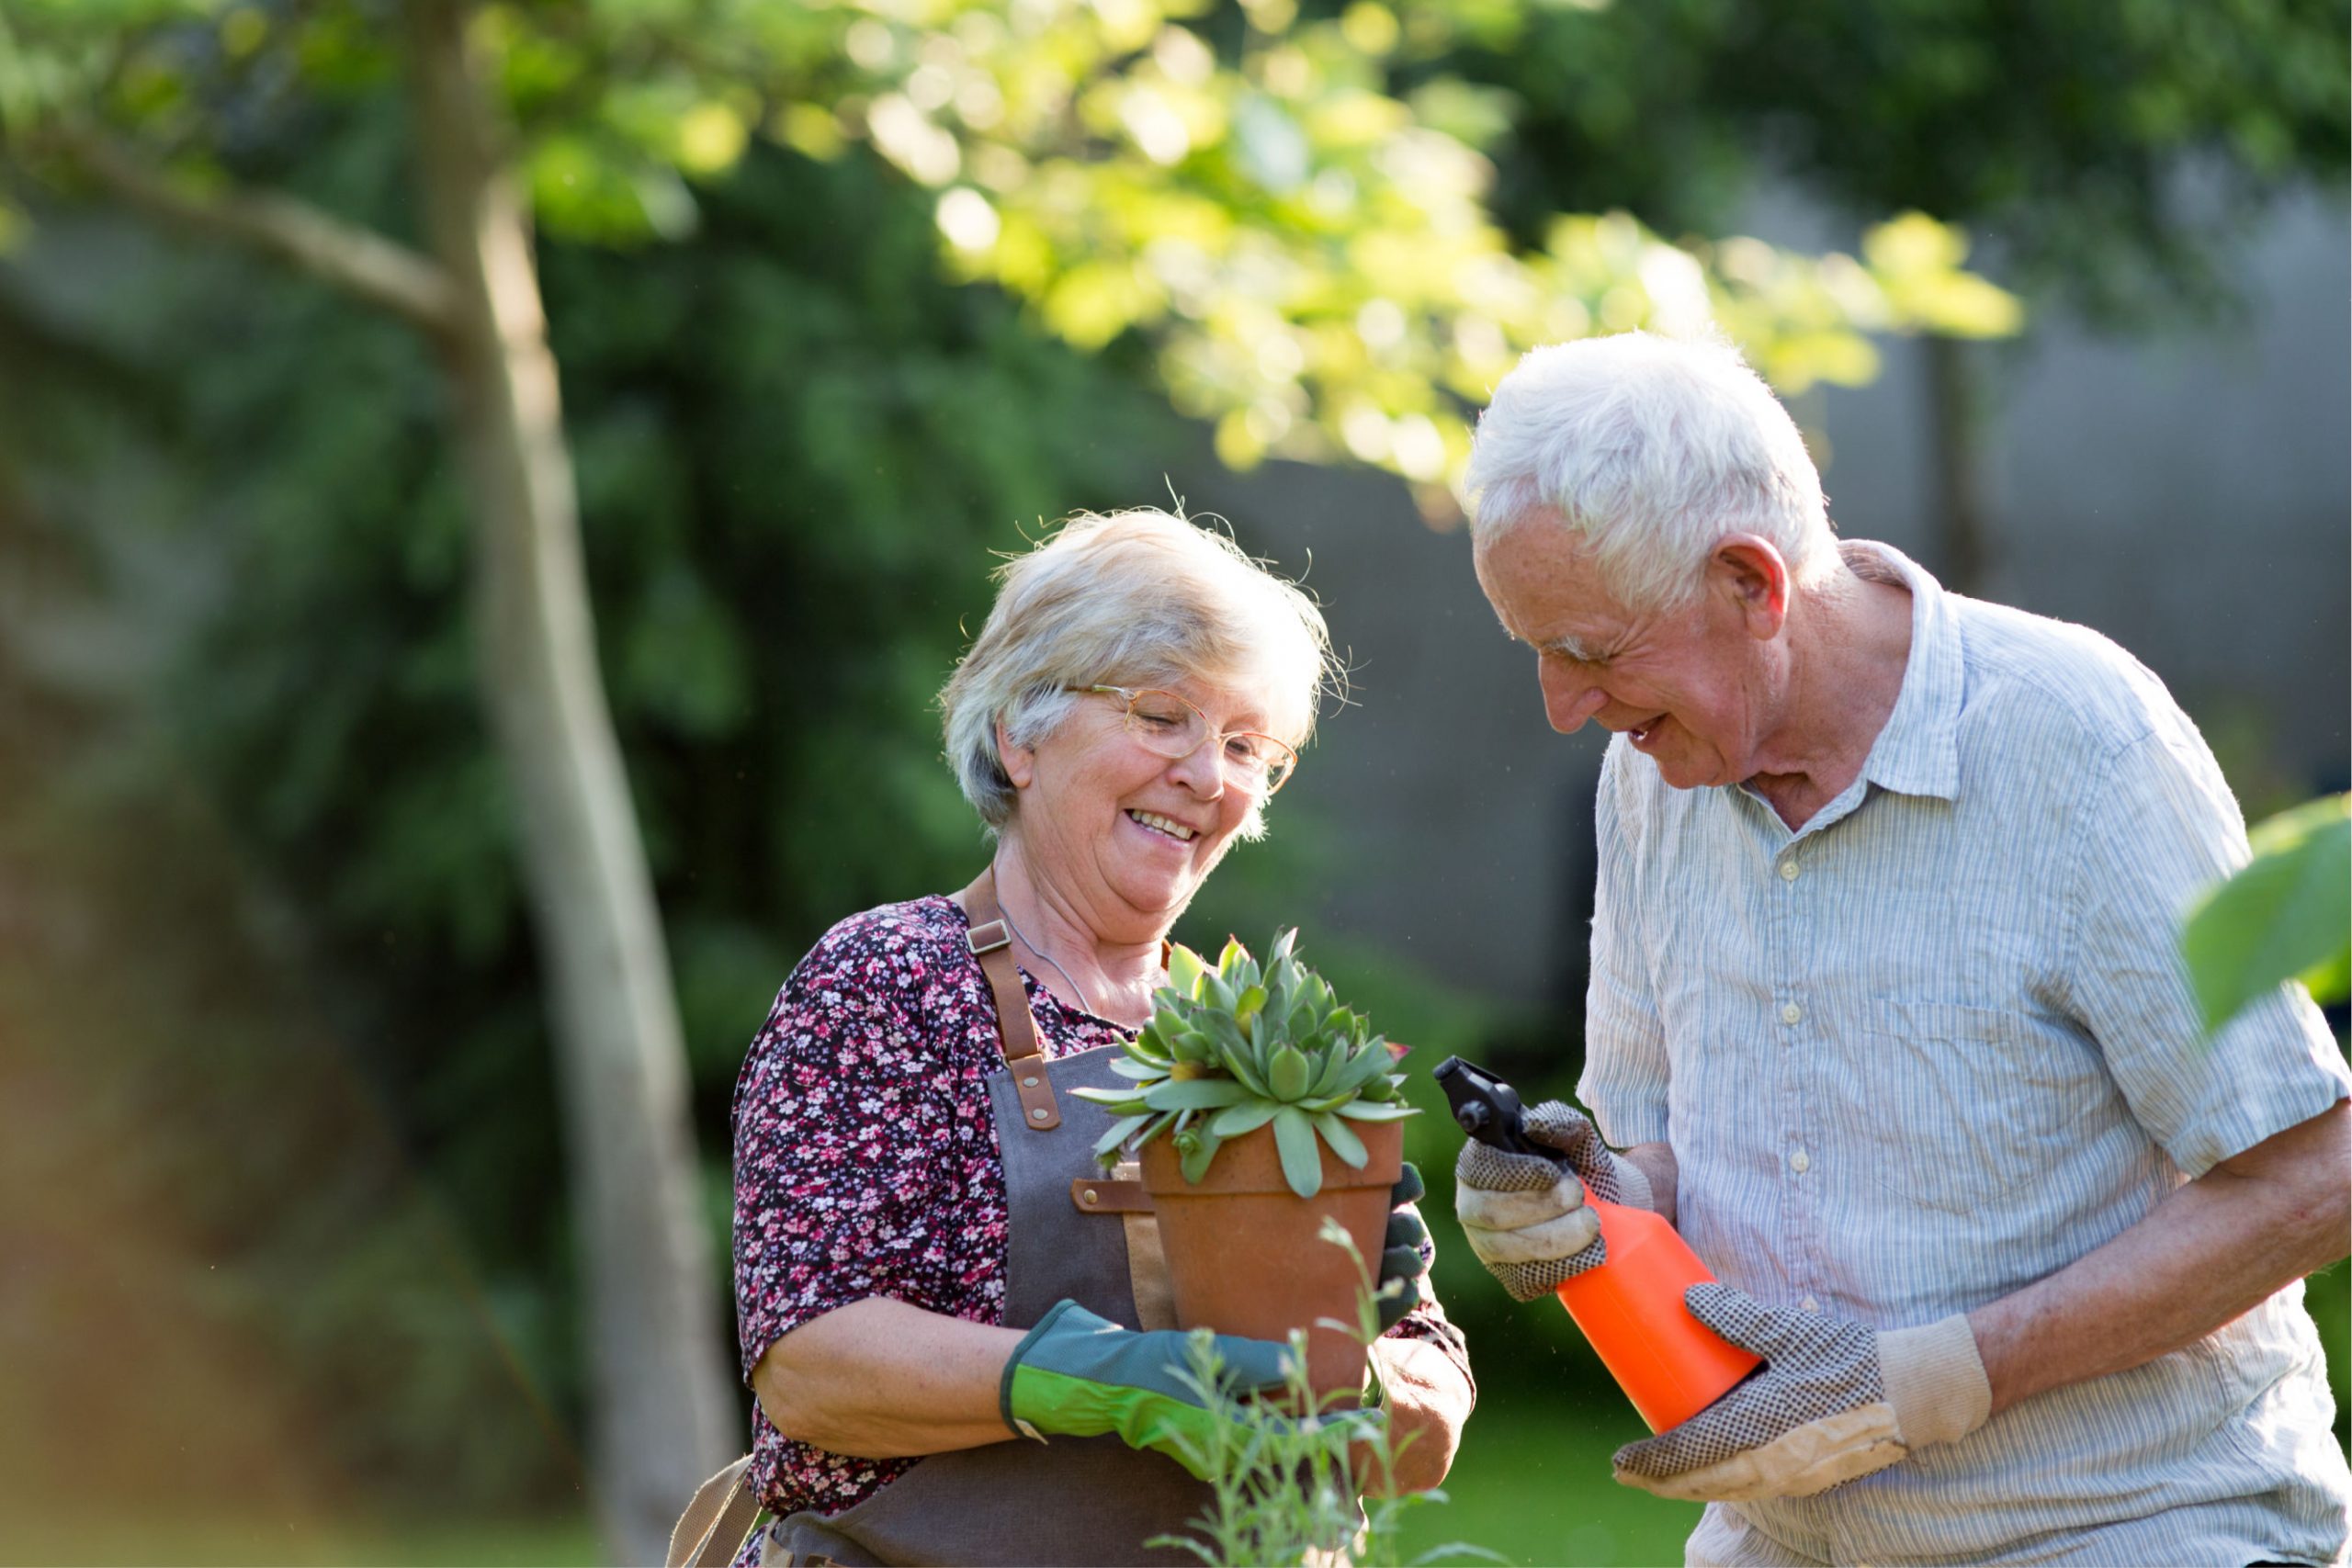 Social Consideration for Widowers—Improving Social Lives